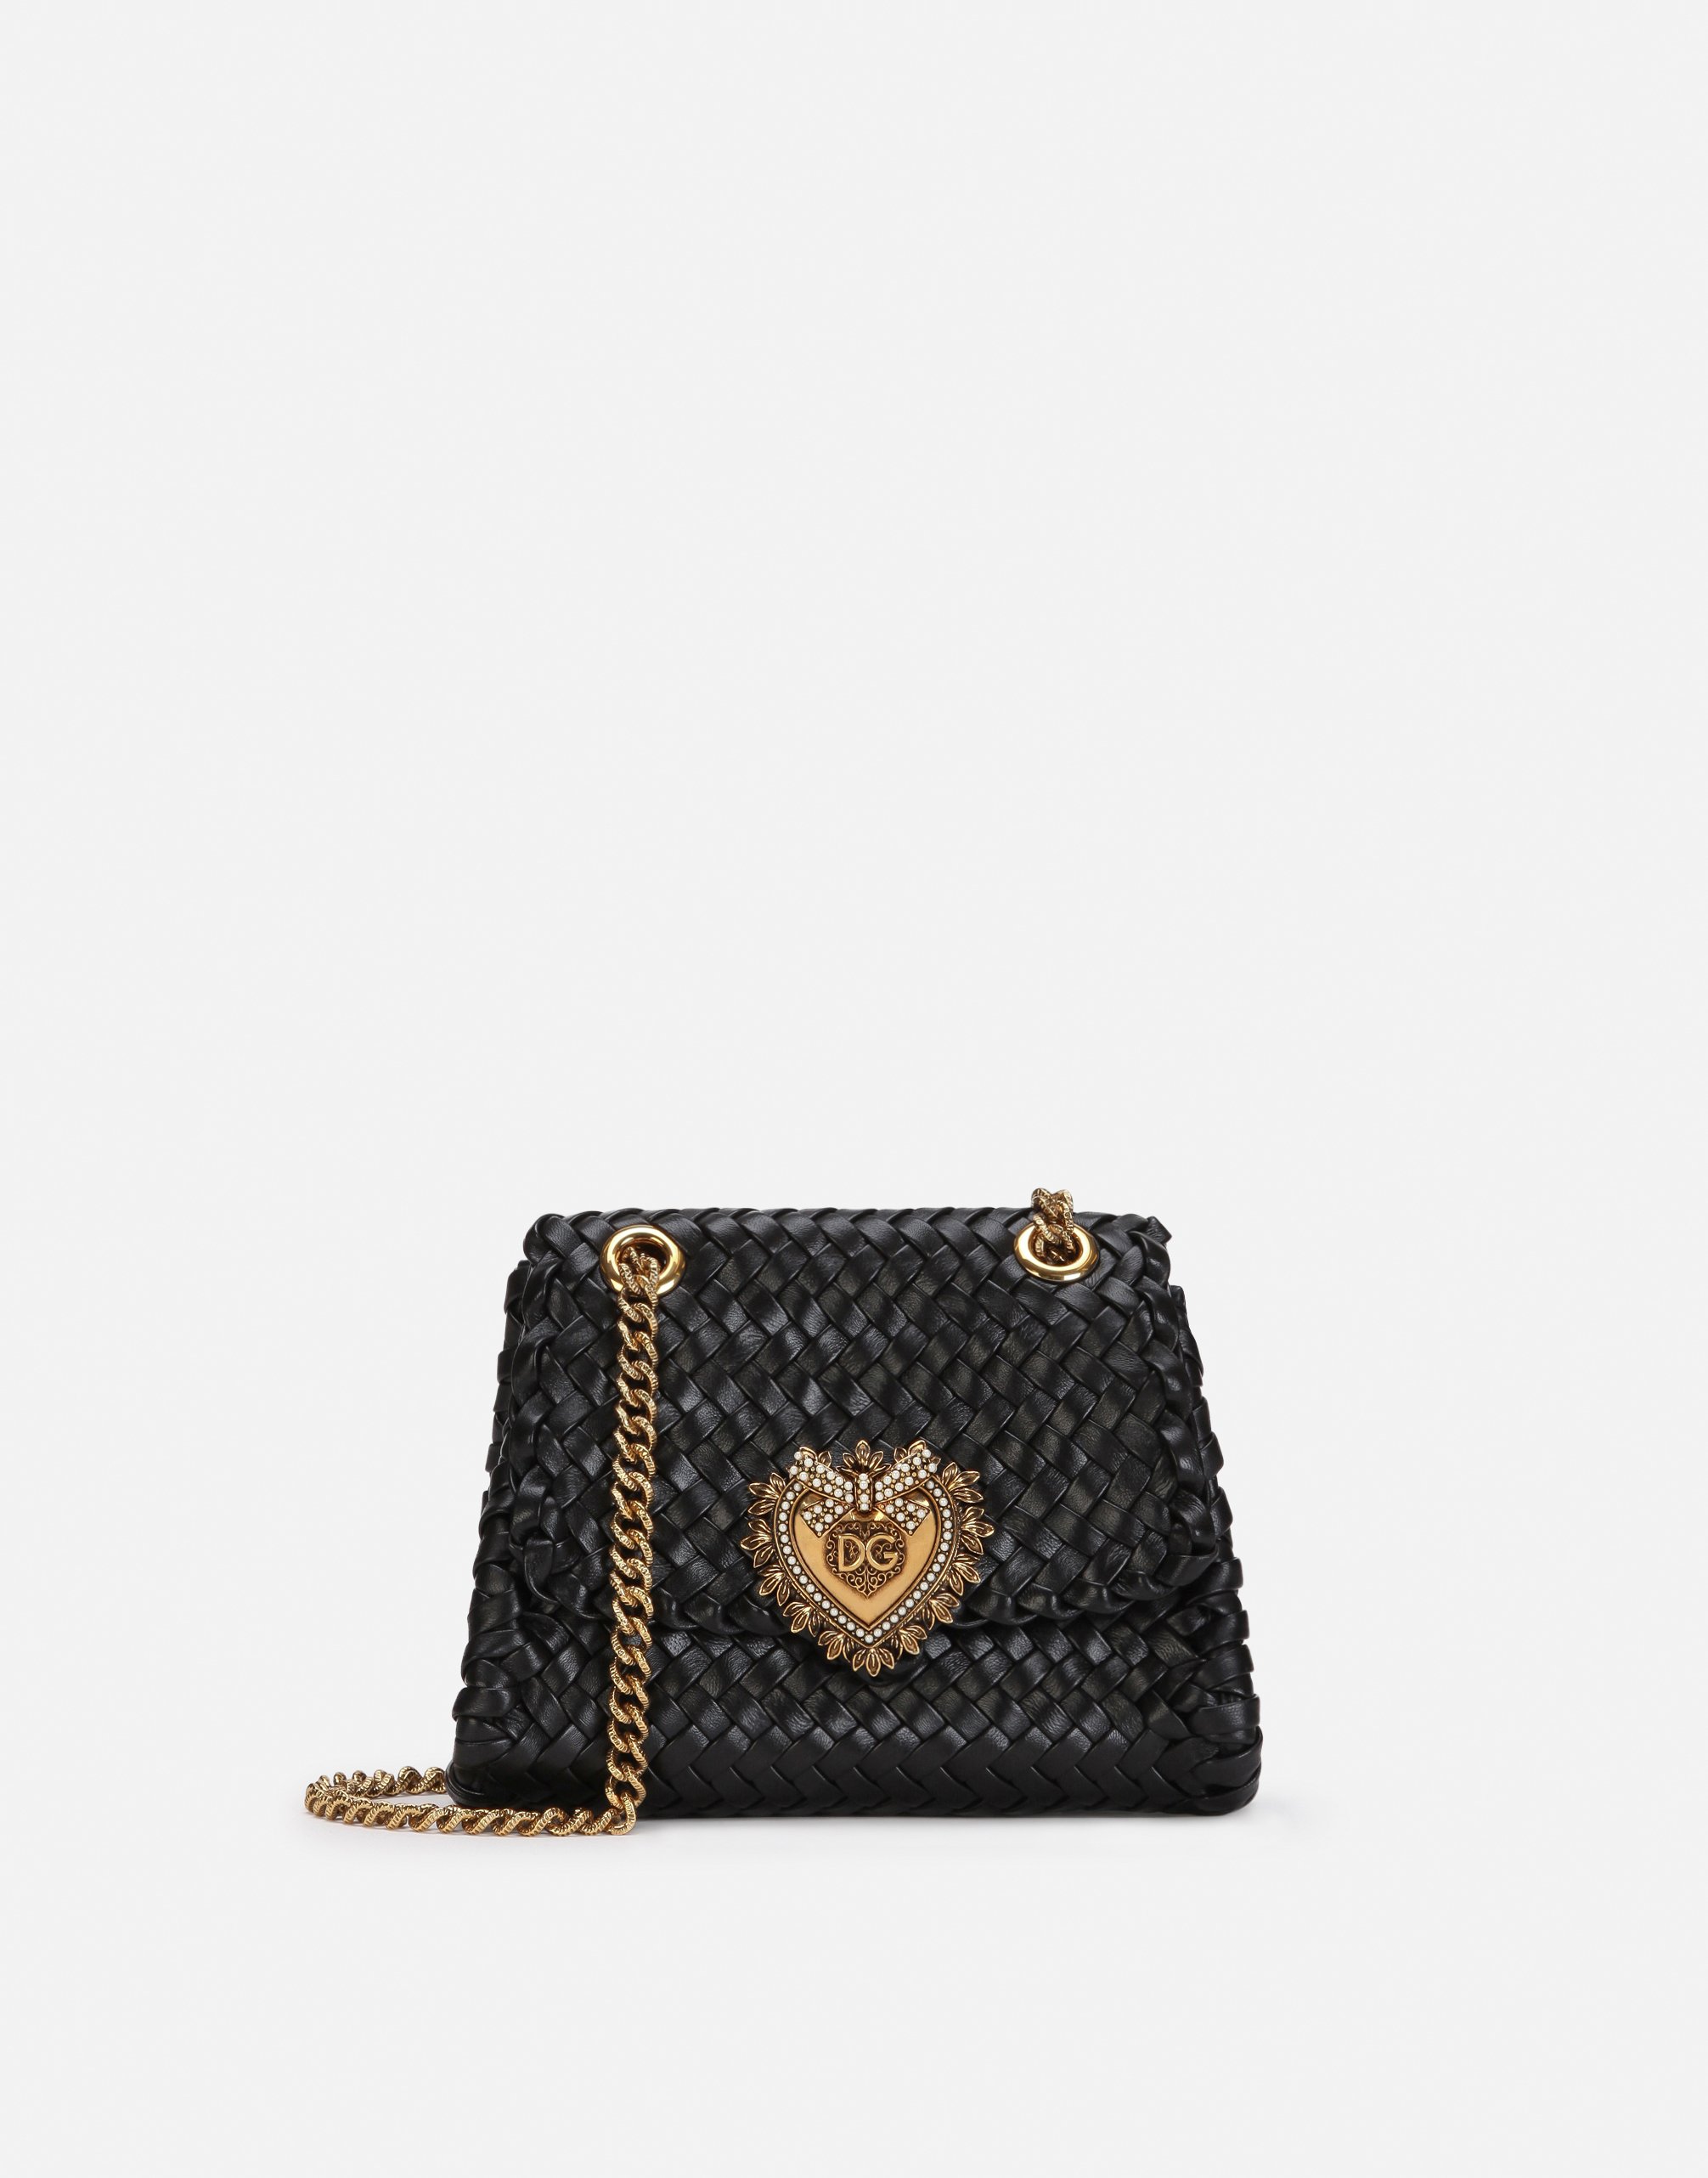 Women's Bags and Purses | Dolce&Gabbana